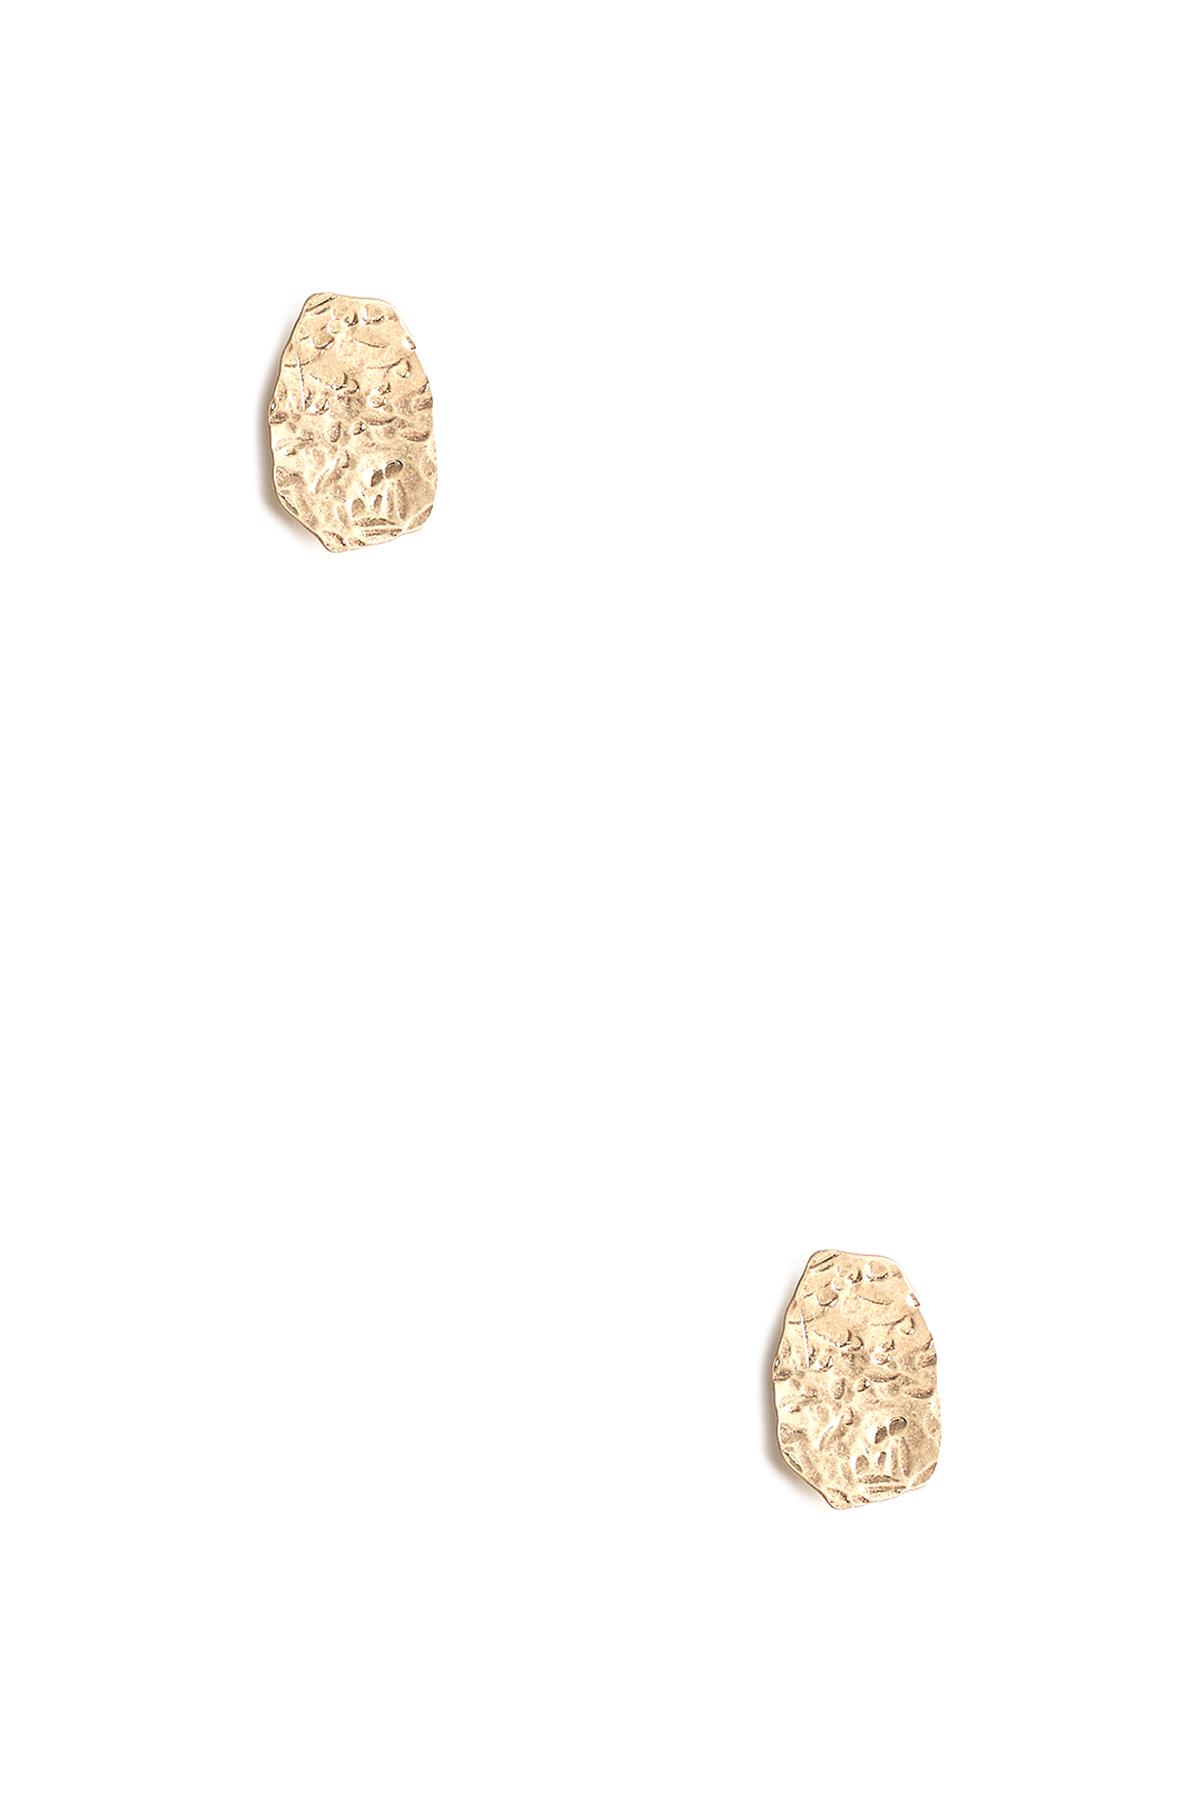 OVAL SHAPED TEXTURE METAL EARRING